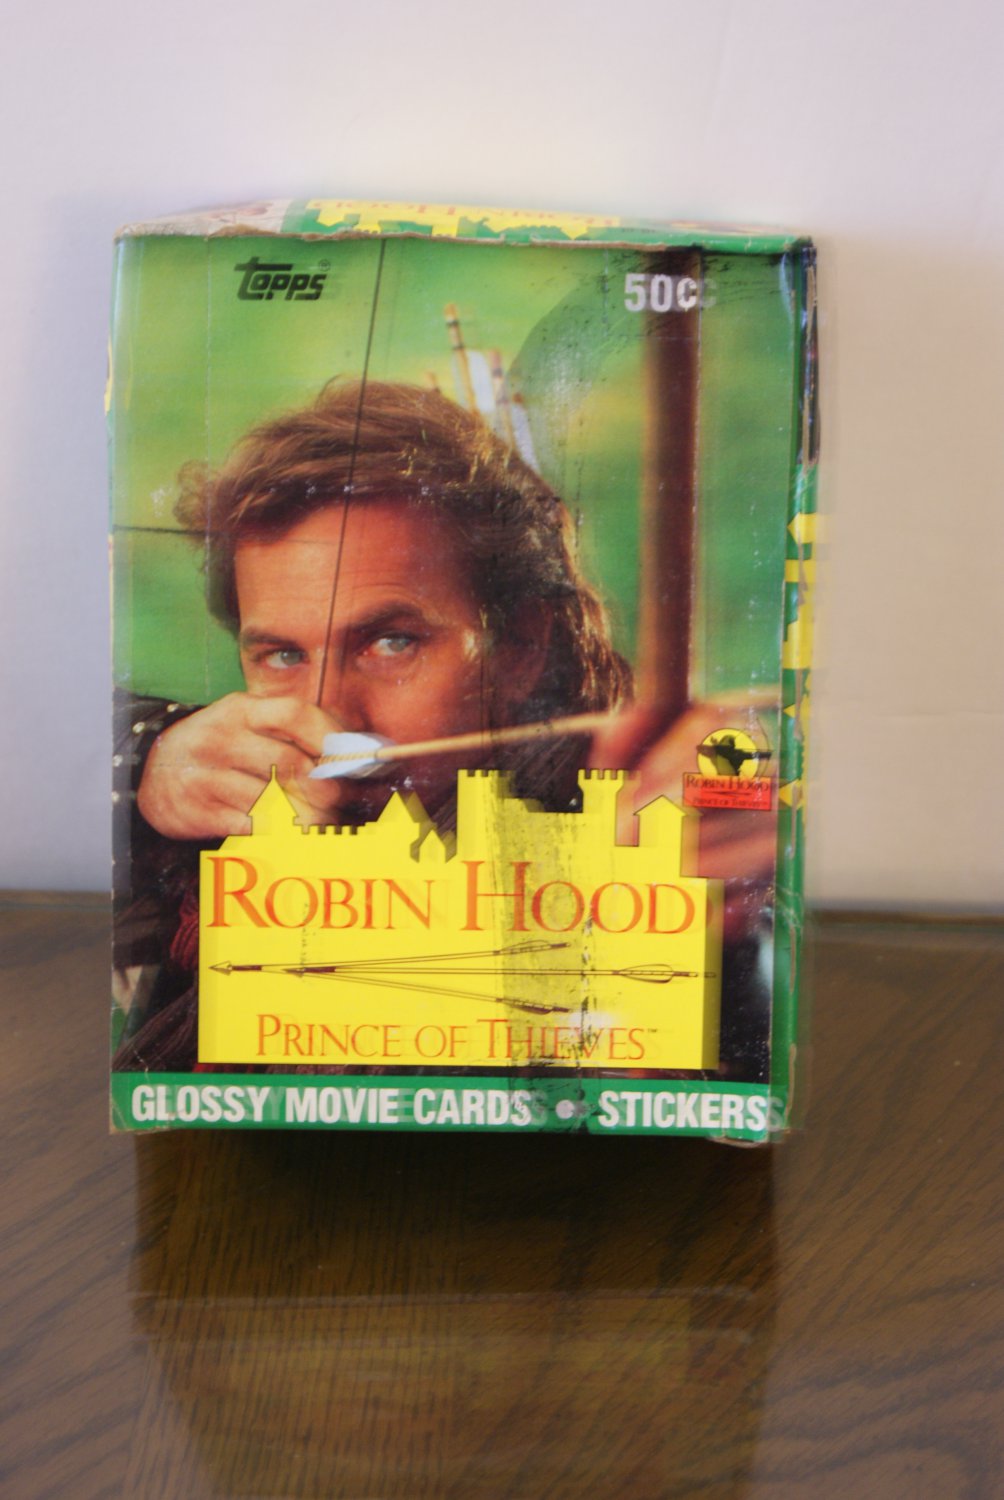 Robin Hood Prince of Thieves trading / bubble gum cards